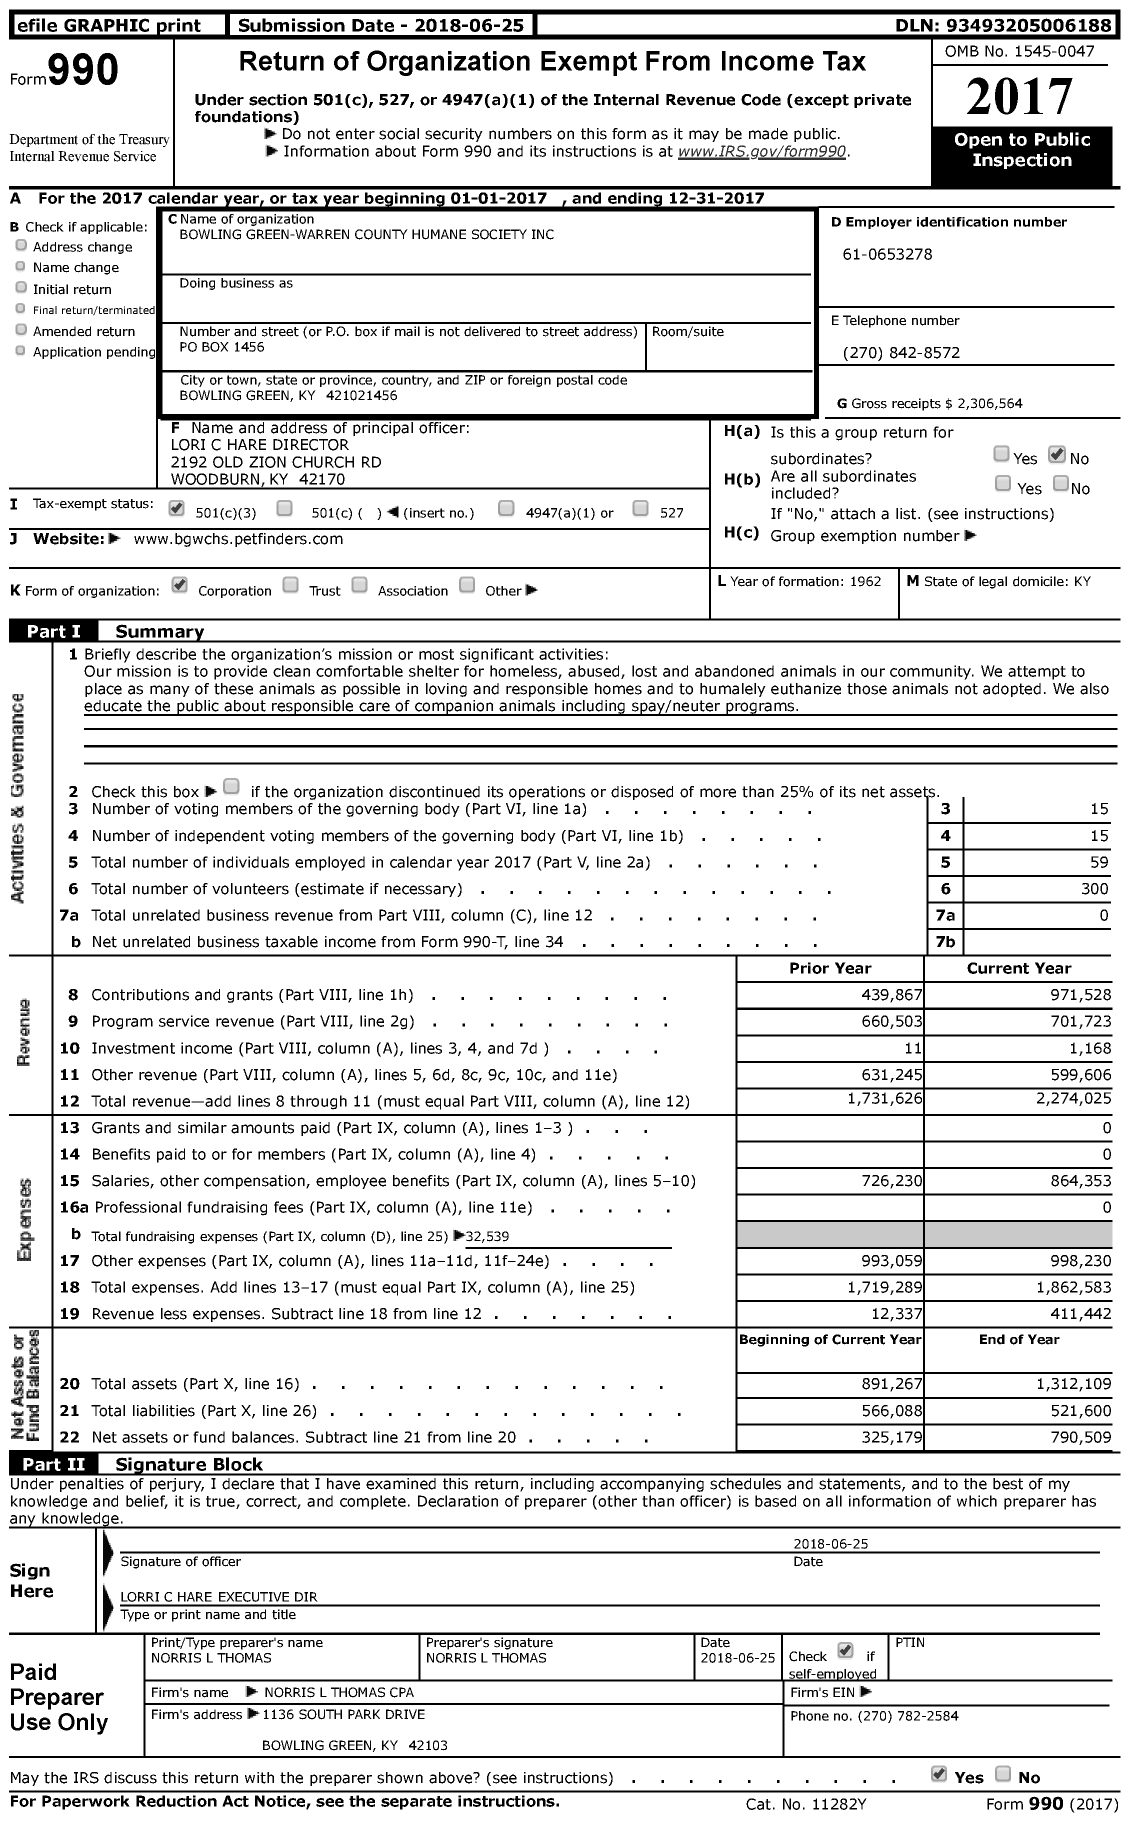 Image of first page of 2017 Form 990 for Bowling Green Warren County Humane Society